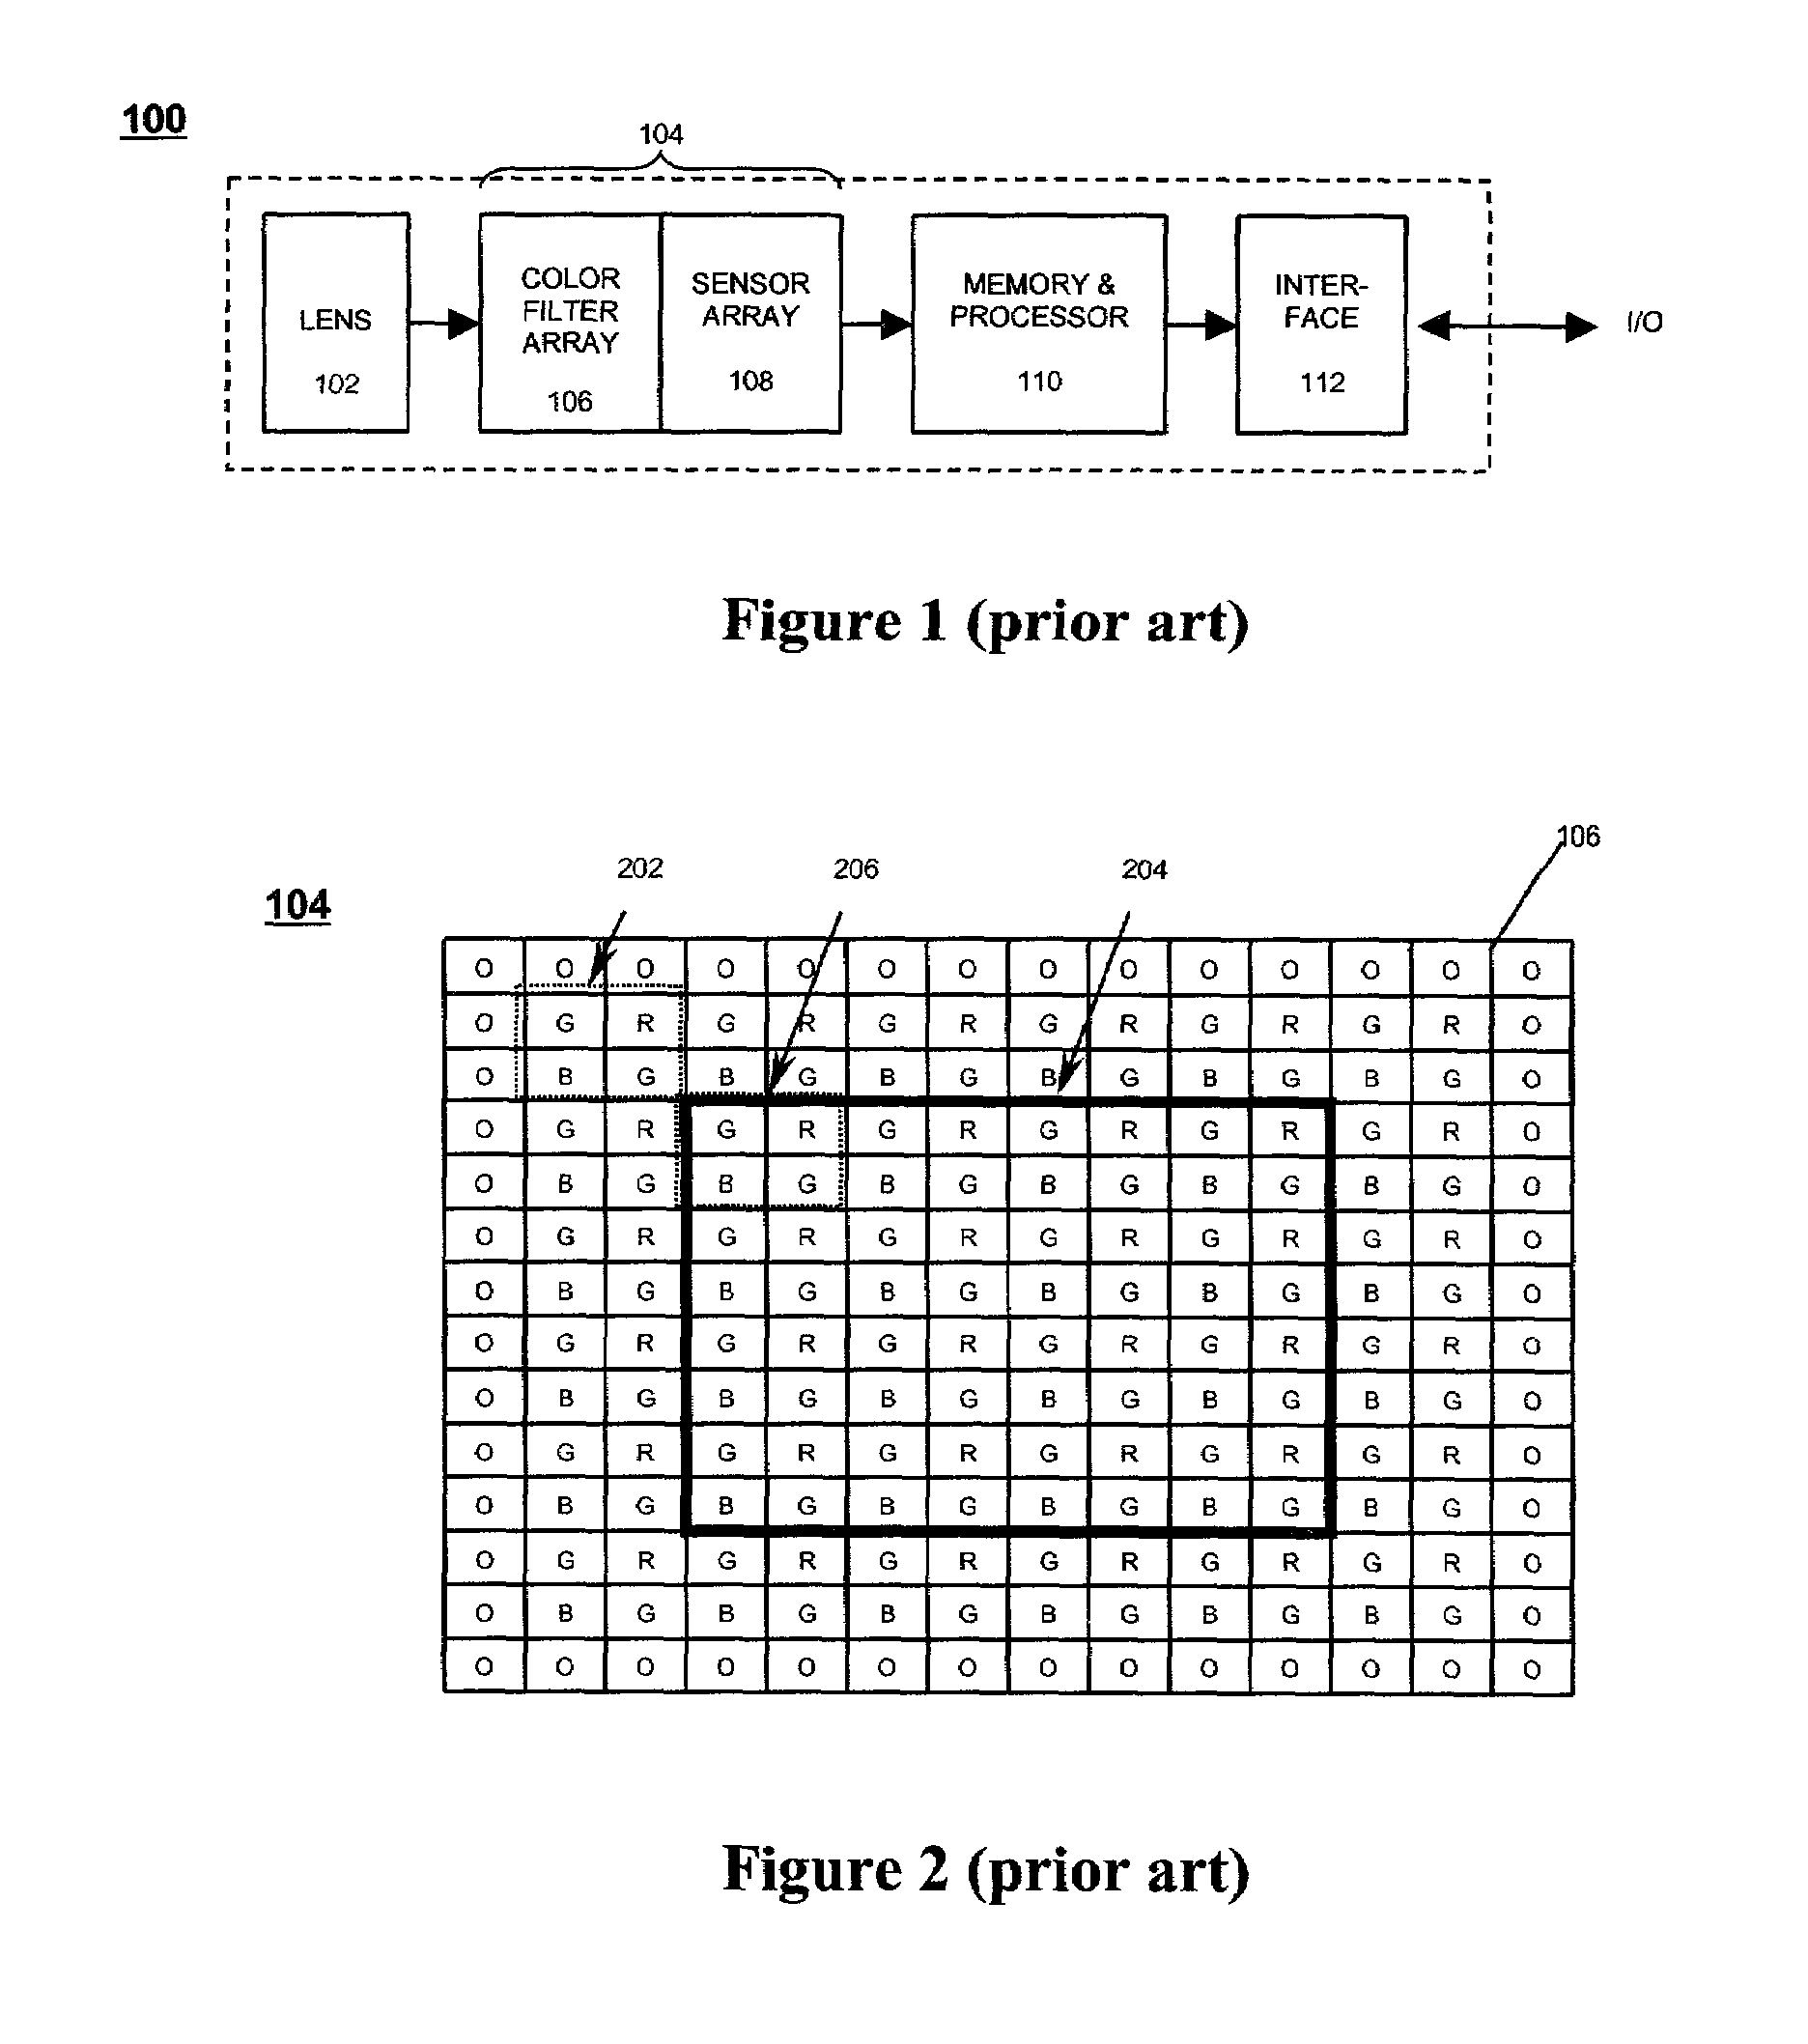 Detection of color filter array alignment in image sensors